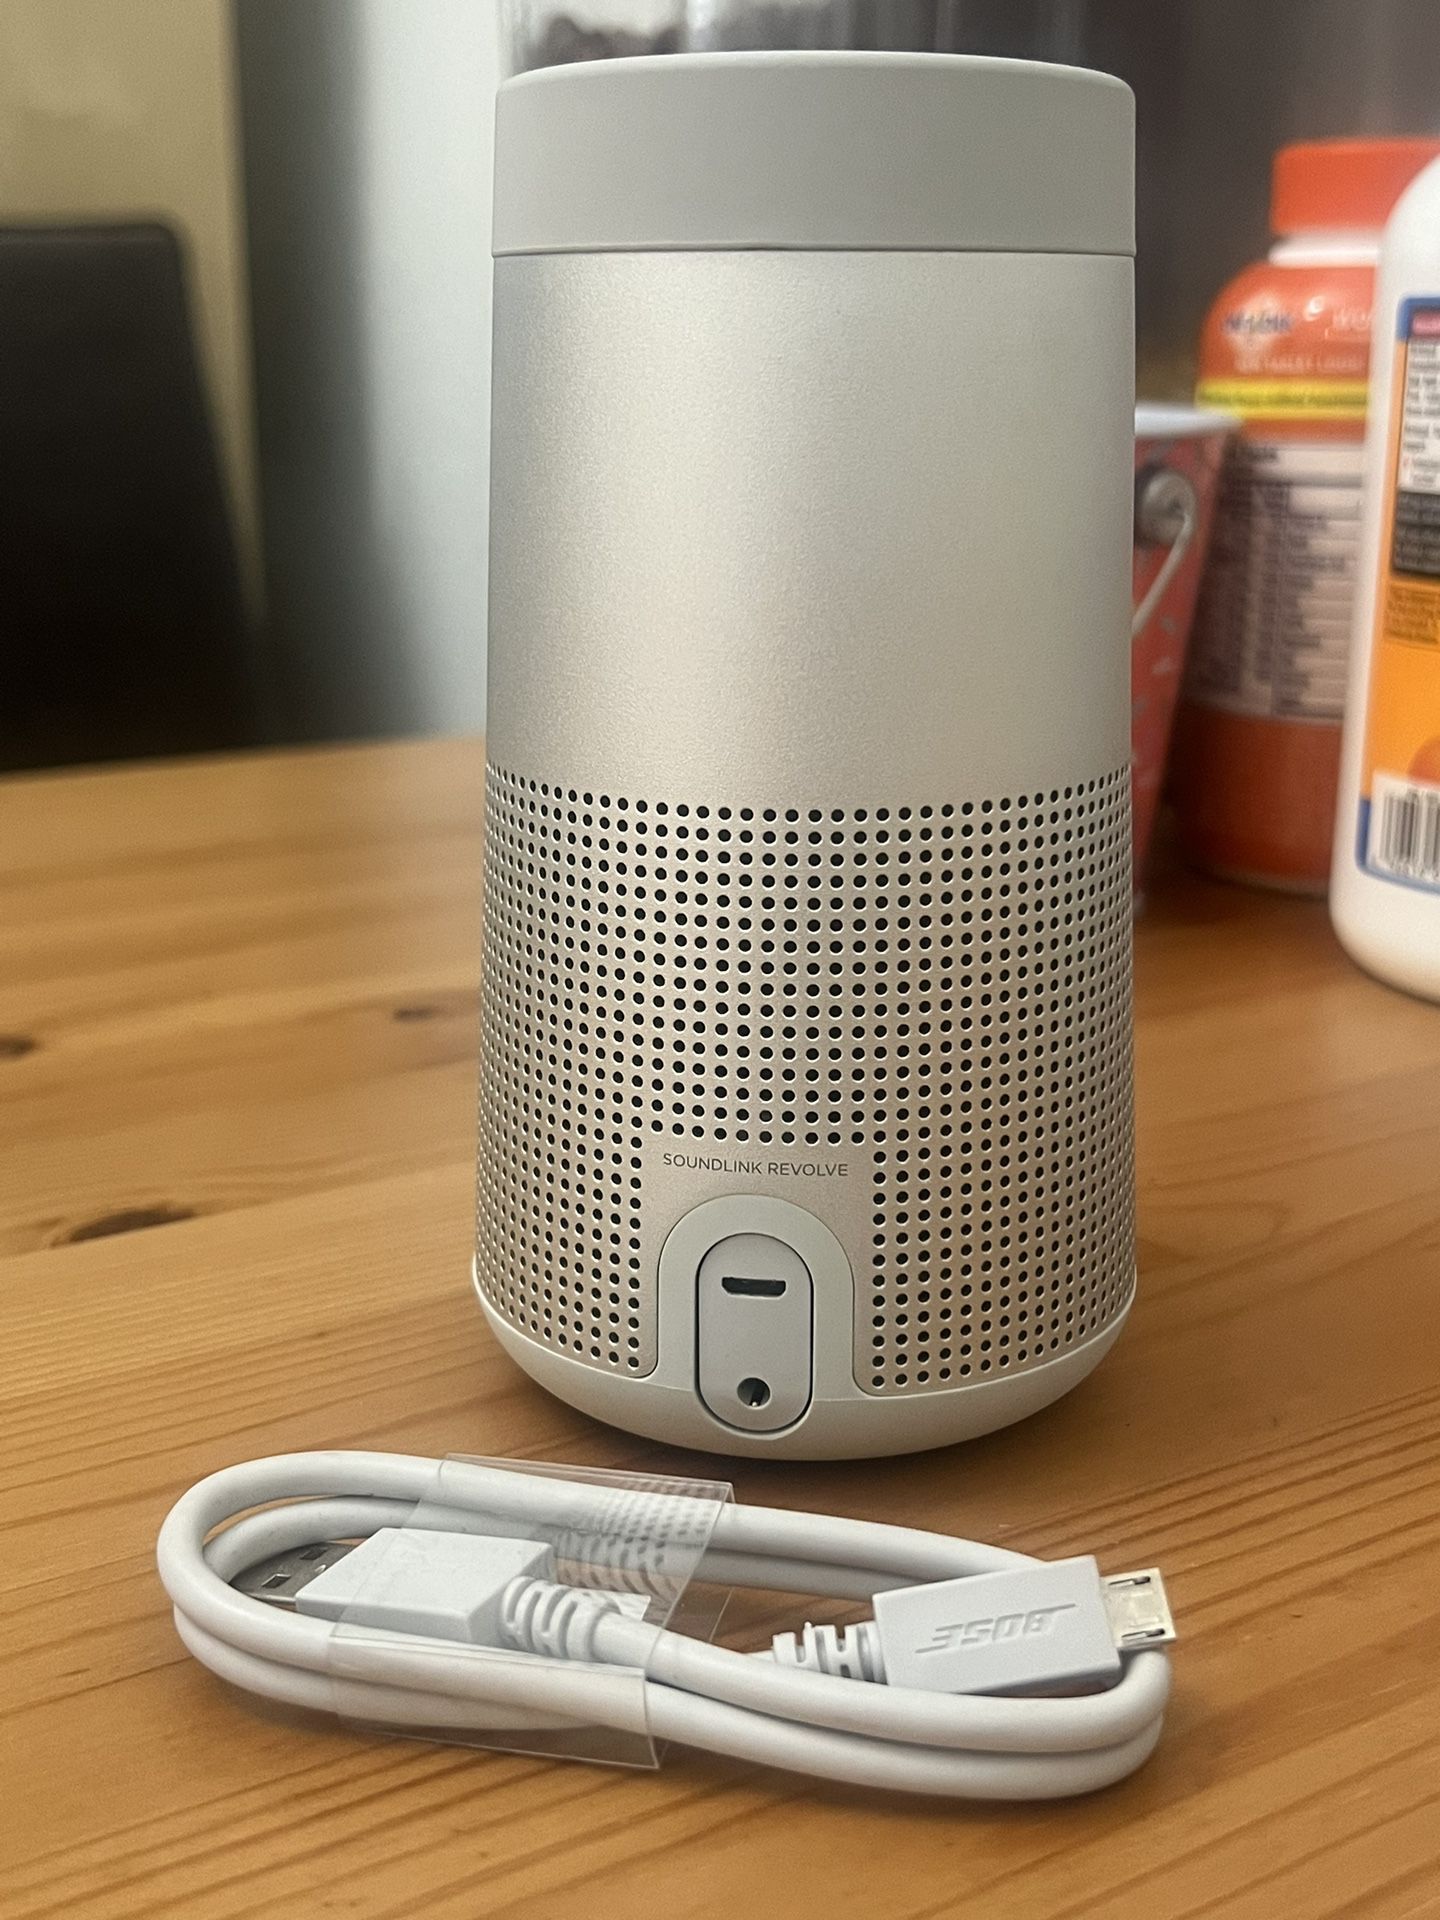 Bose SoundLink Revolve Bluetooth Portable Speaker and USB Cable